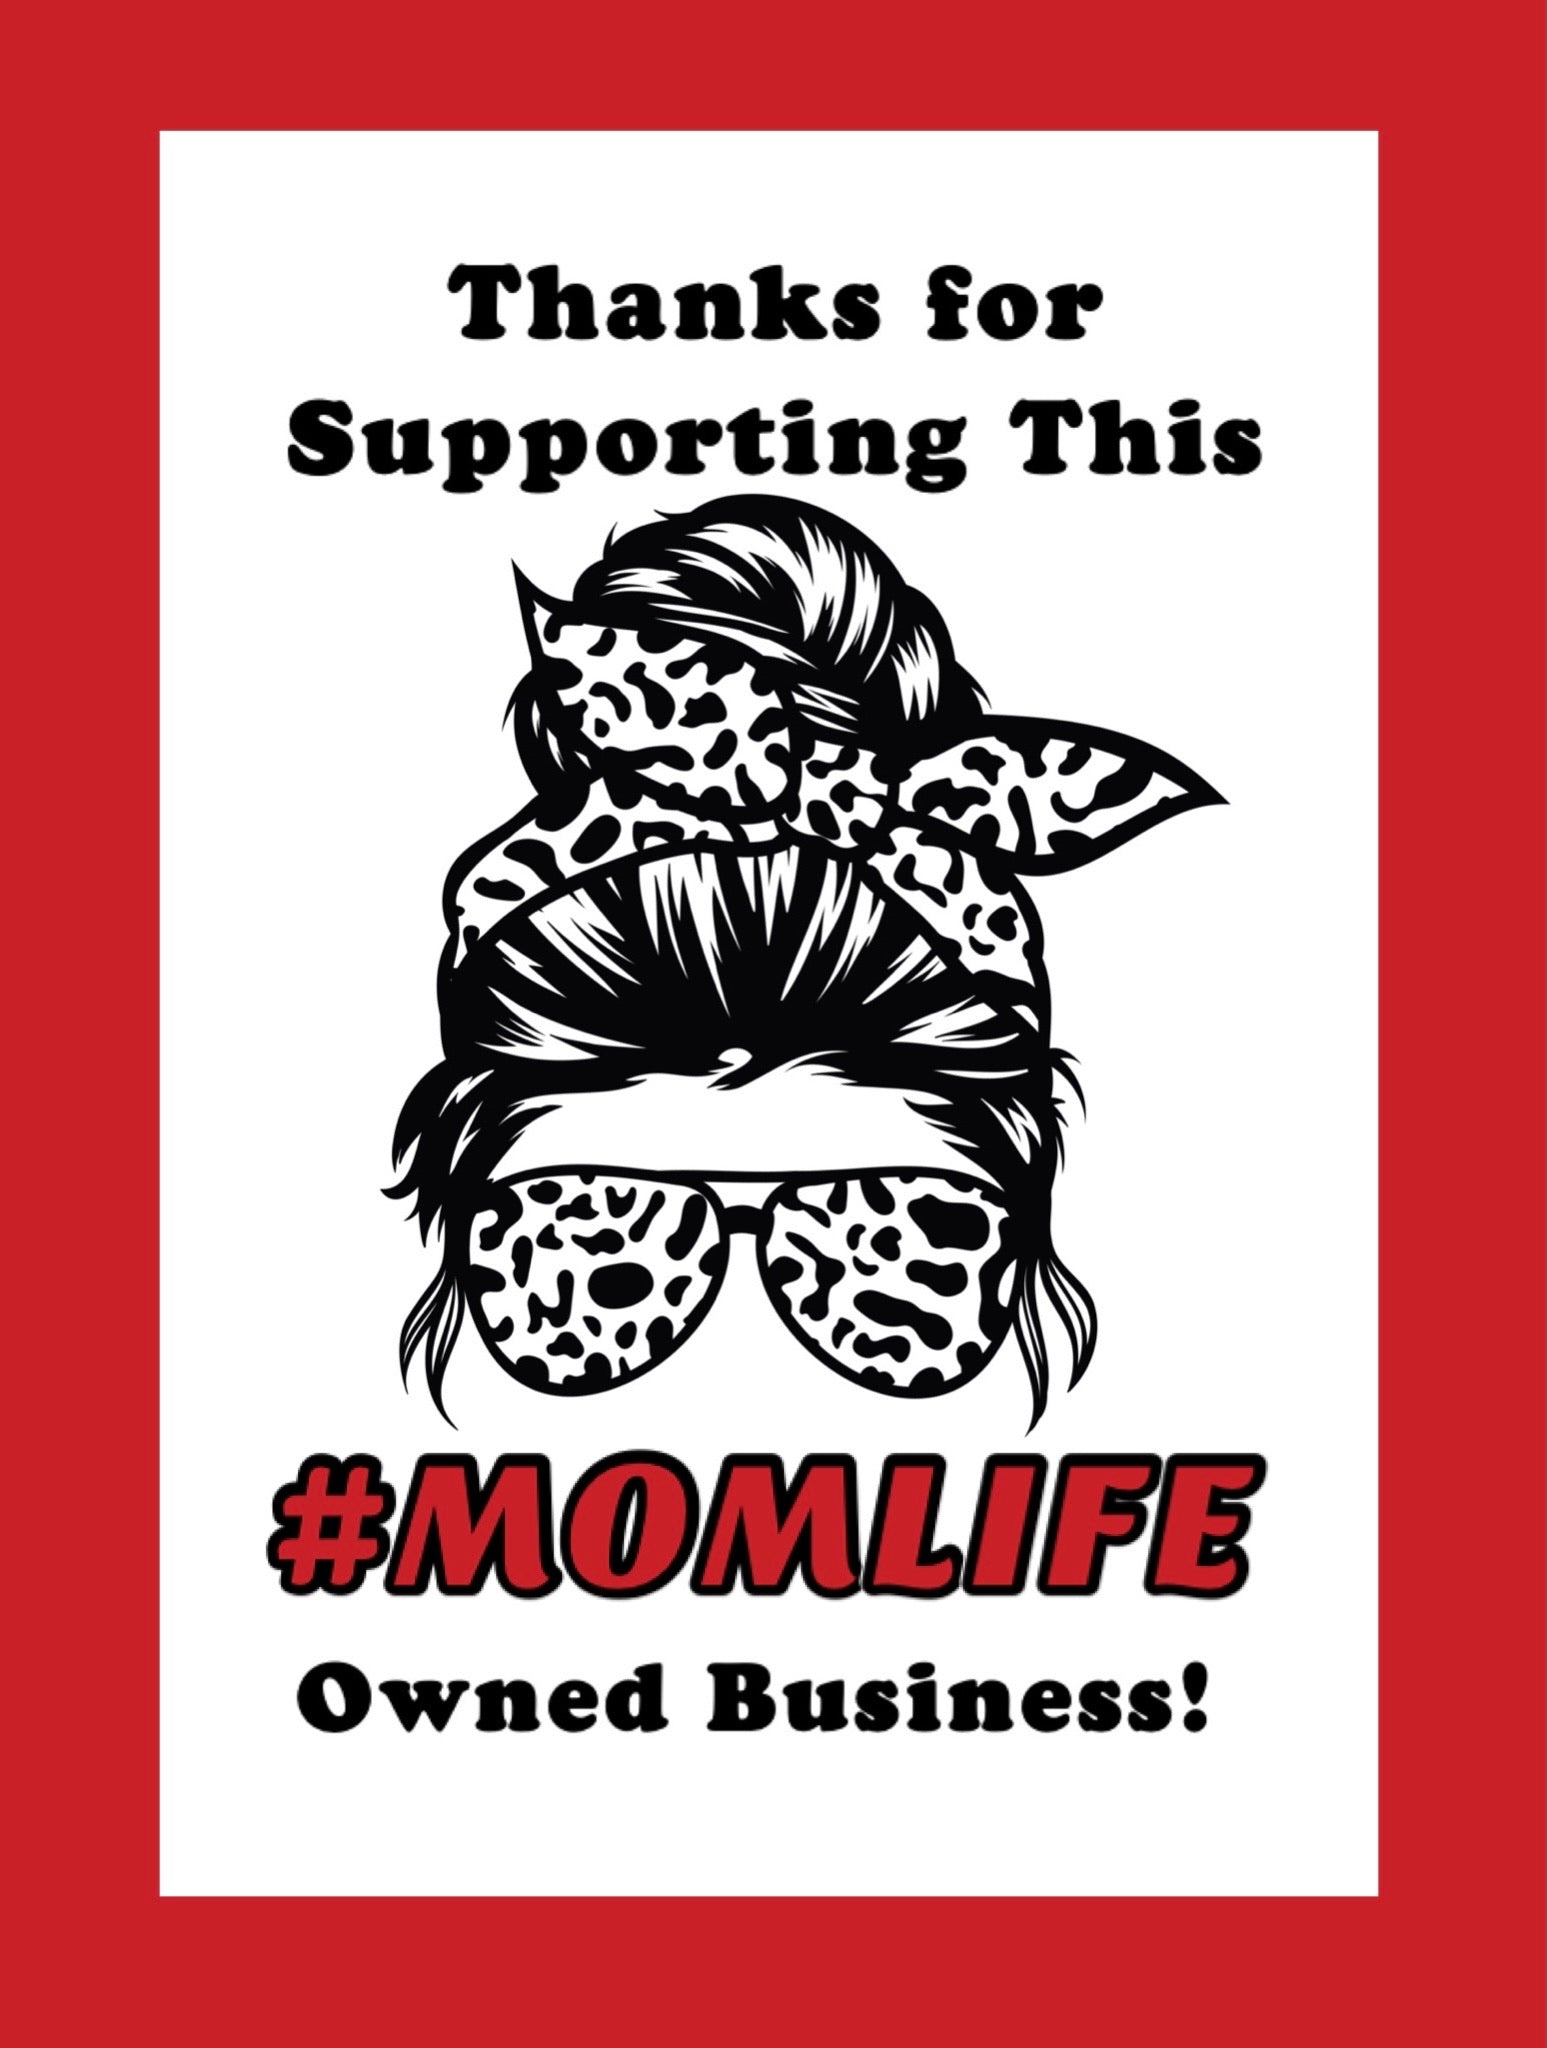 TGD Exclusive! Cow Print Thank you for supporting this #MOMLIFE owned business 2x2.5 Square Stickers, 25 stickers per pack